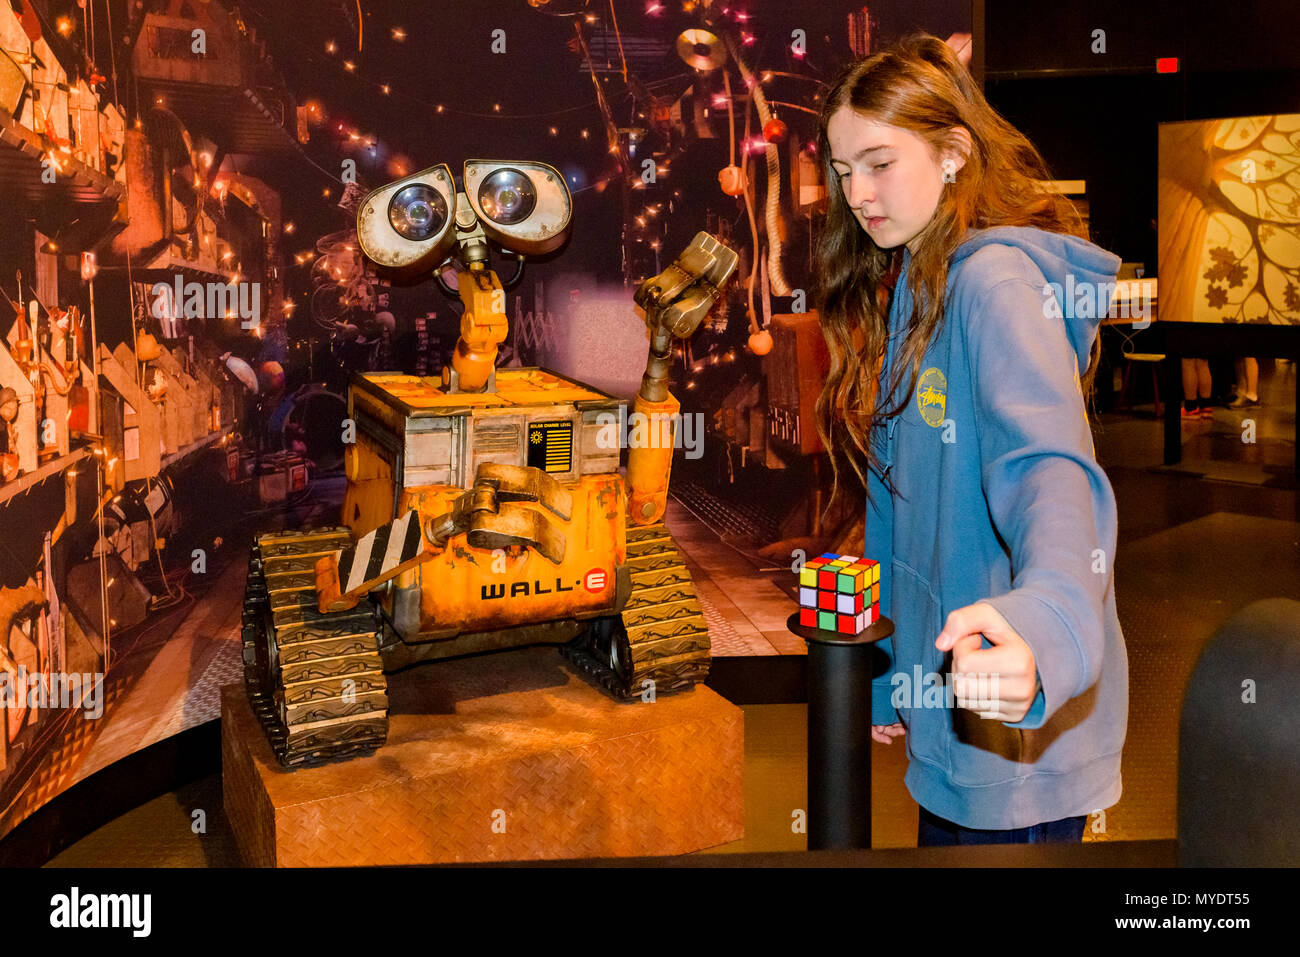 Boy interacts with Wall-E, Pixar exhibit, Telus World of Science, Vancouver, British Columbia, Canada. Stock Photo